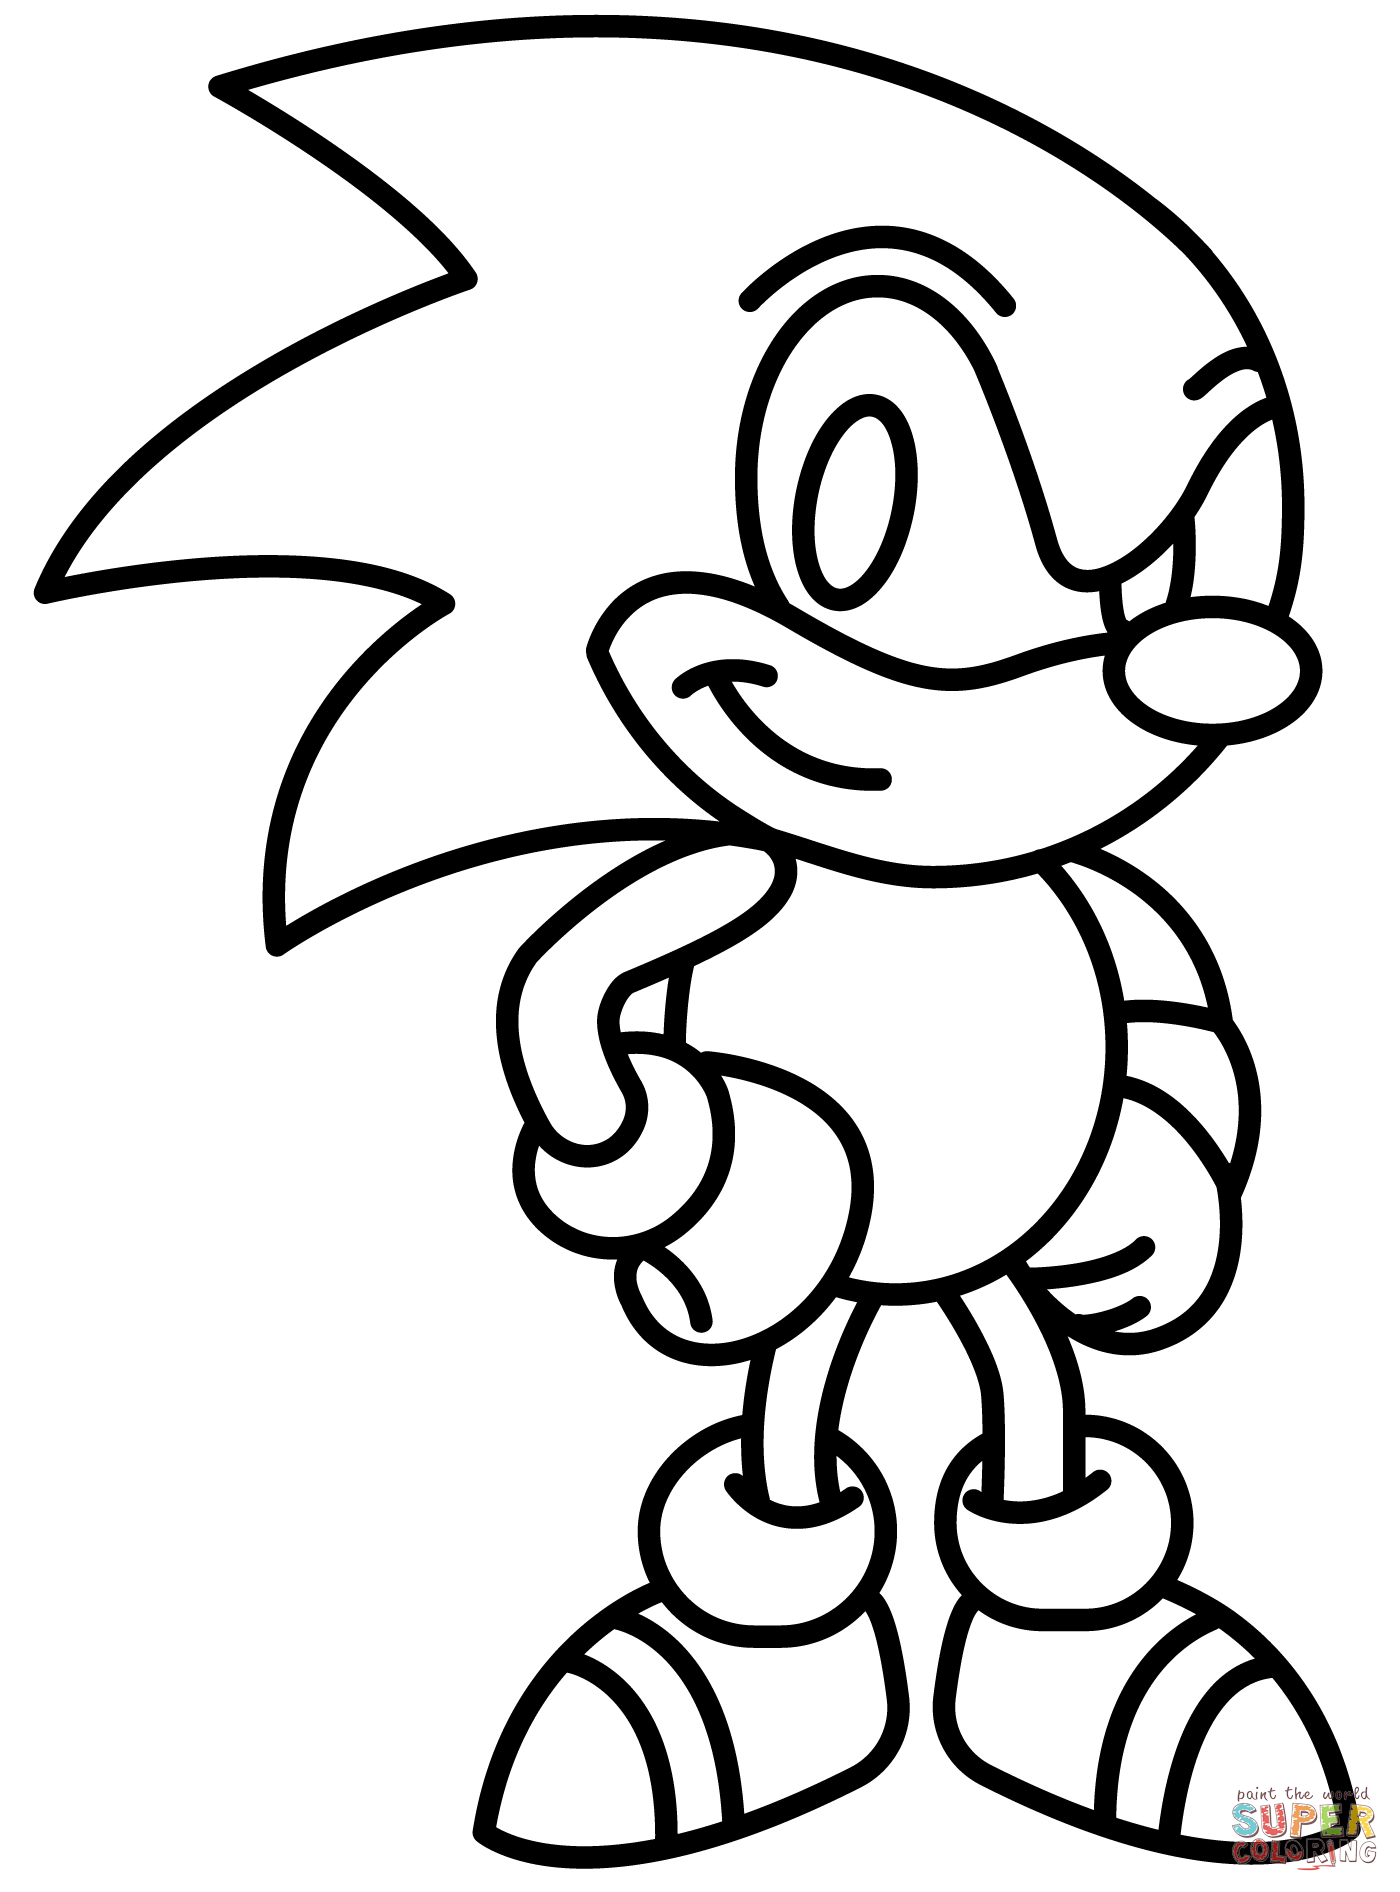 Chibi Sonic Hedgehog coloring page | Free Printable Coloring Pages